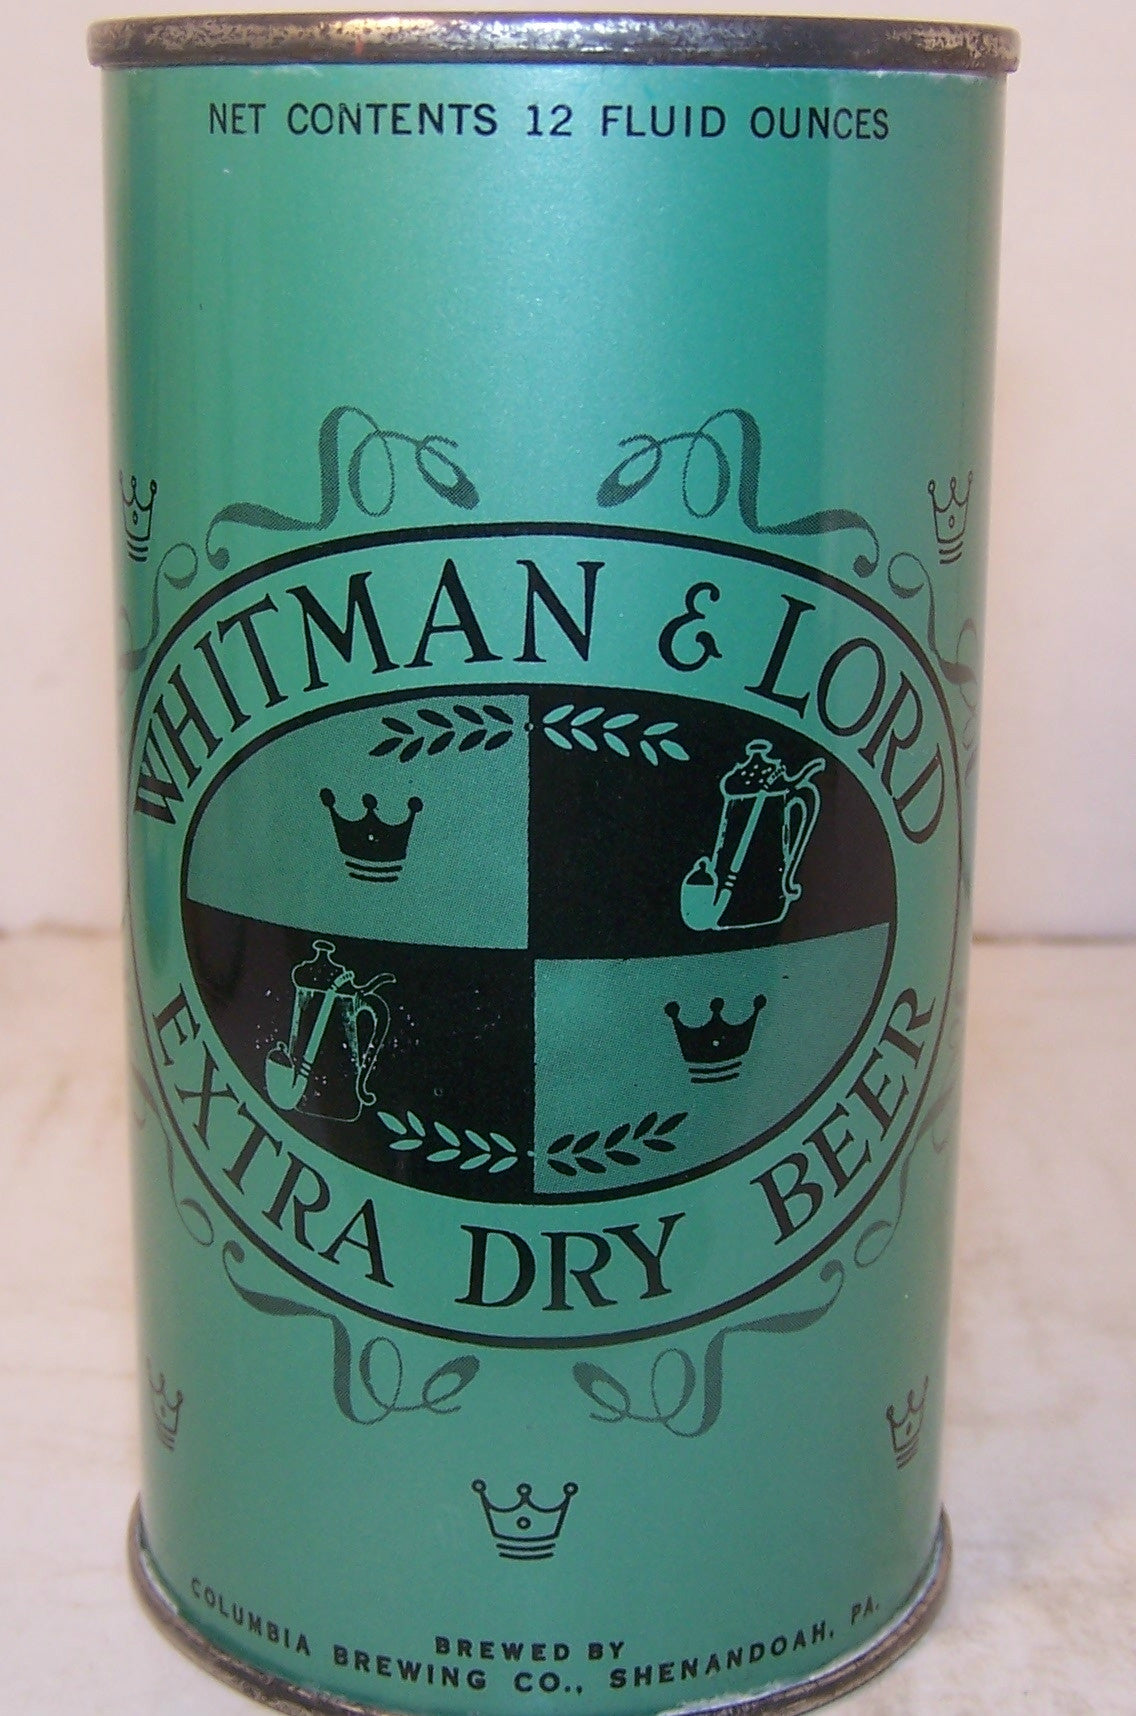 Whitman & Lord Extra Dry Beer, USBC 145-20, Grade A1+ Sold on 07/28/16